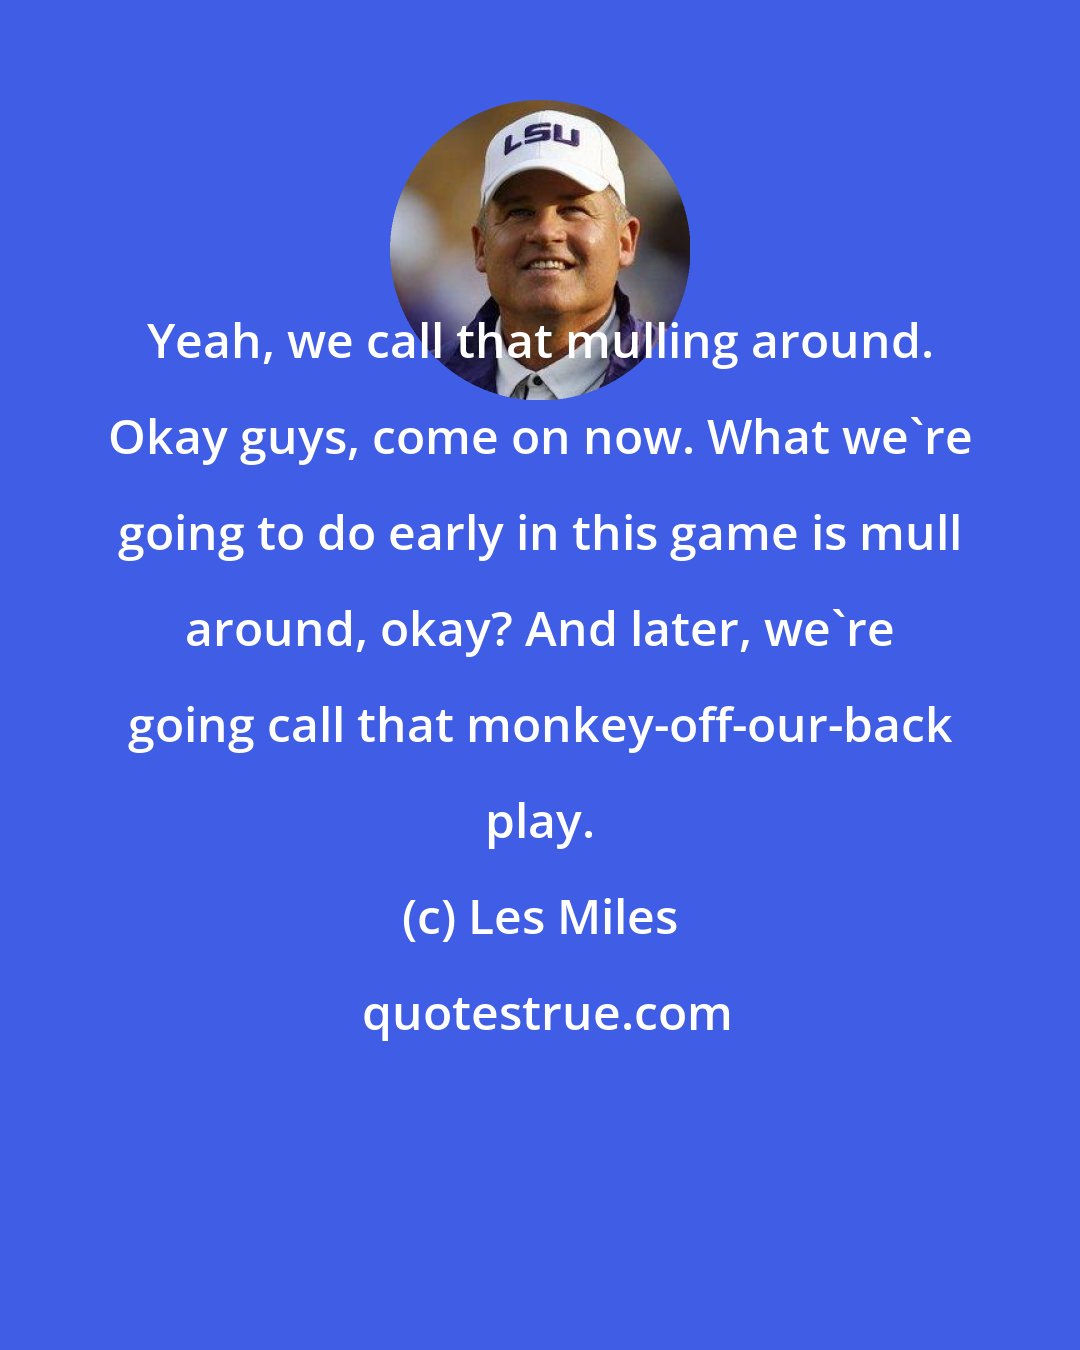 Les Miles: Yeah, we call that mulling around. Okay guys, come on now. What we're going to do early in this game is mull around, okay? And later, we're going call that monkey-off-our-back play.